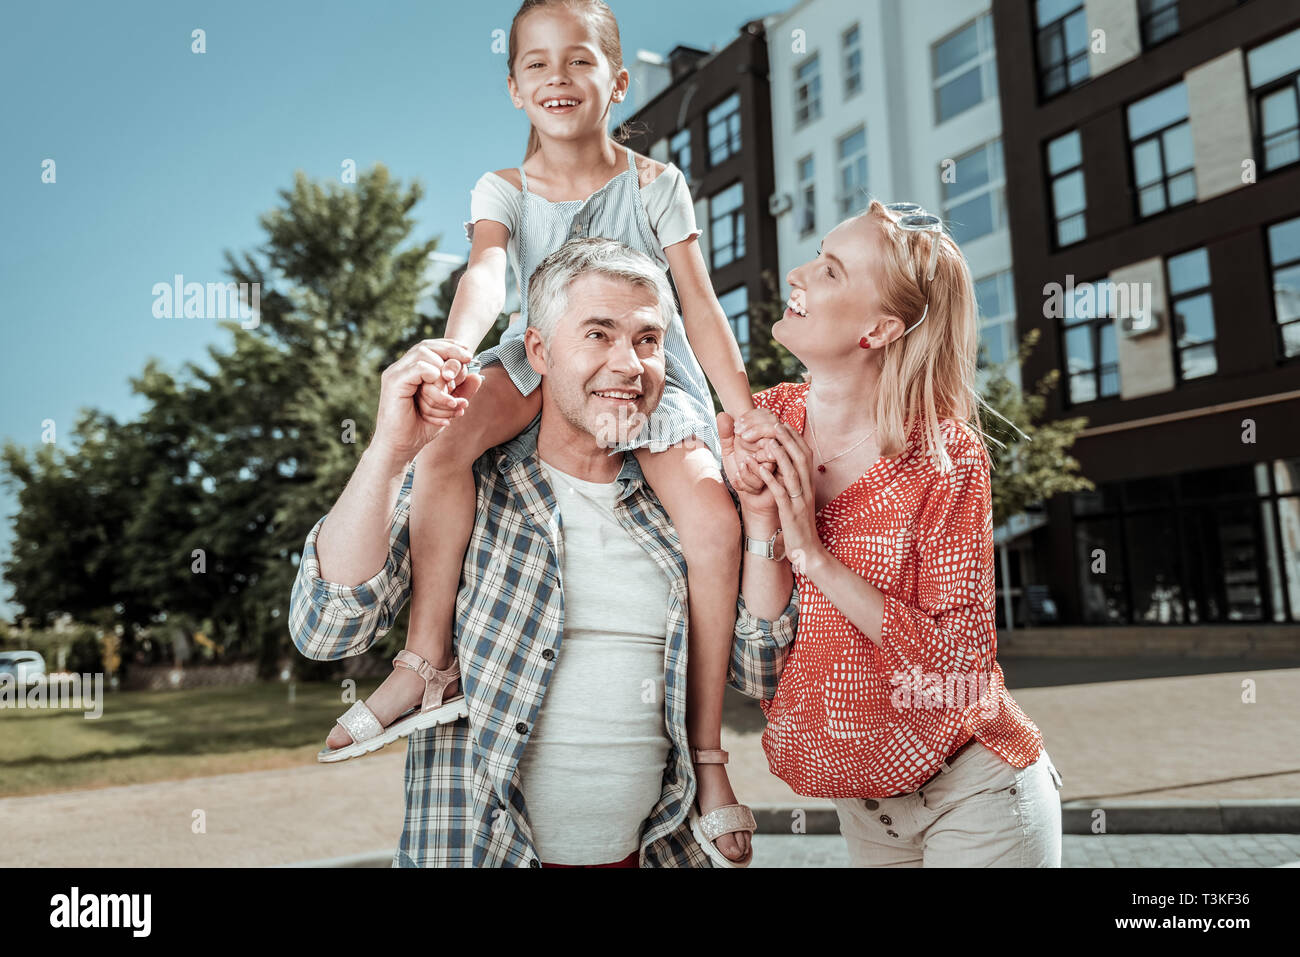 Nice happy girl sitting on her dads shoulders Stock Photo